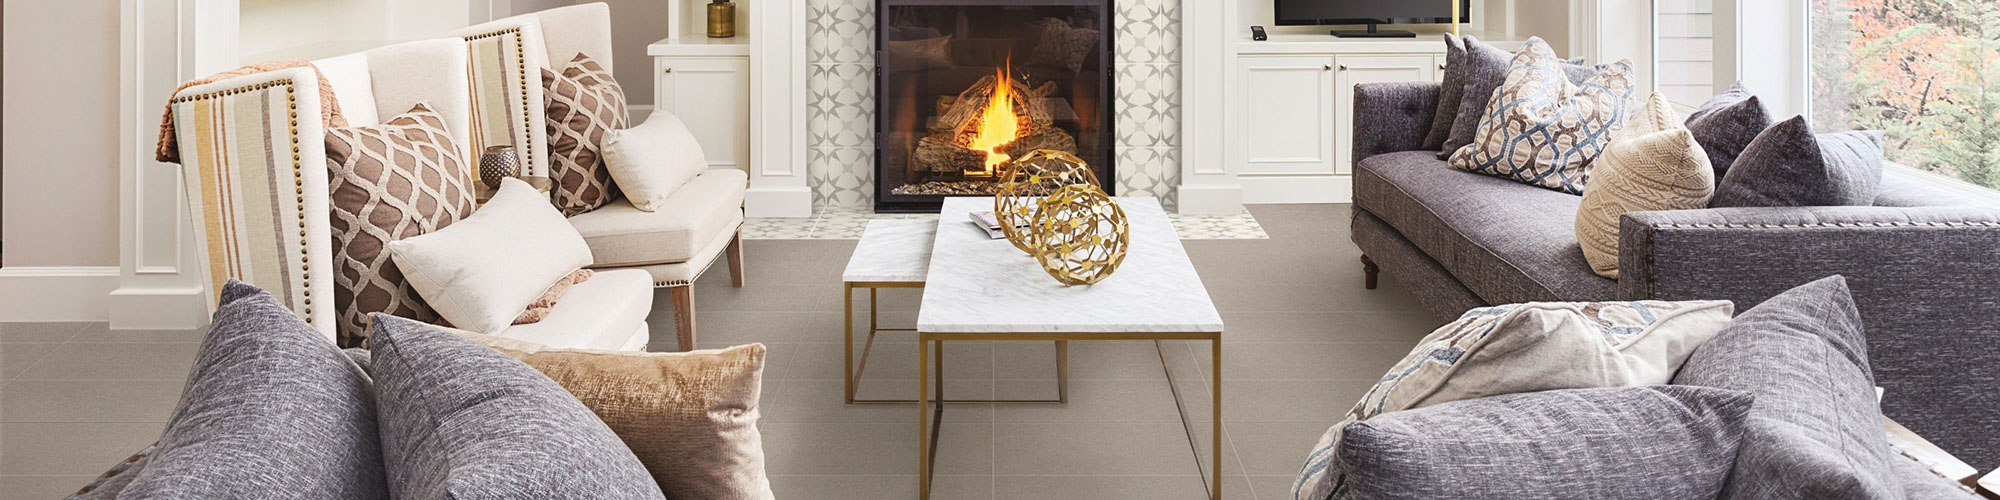 Living room with white built-ins, fireplace with off-white & gray encaustic tile, gray stone look flooring tiles, gray couch, and marble coffee table.